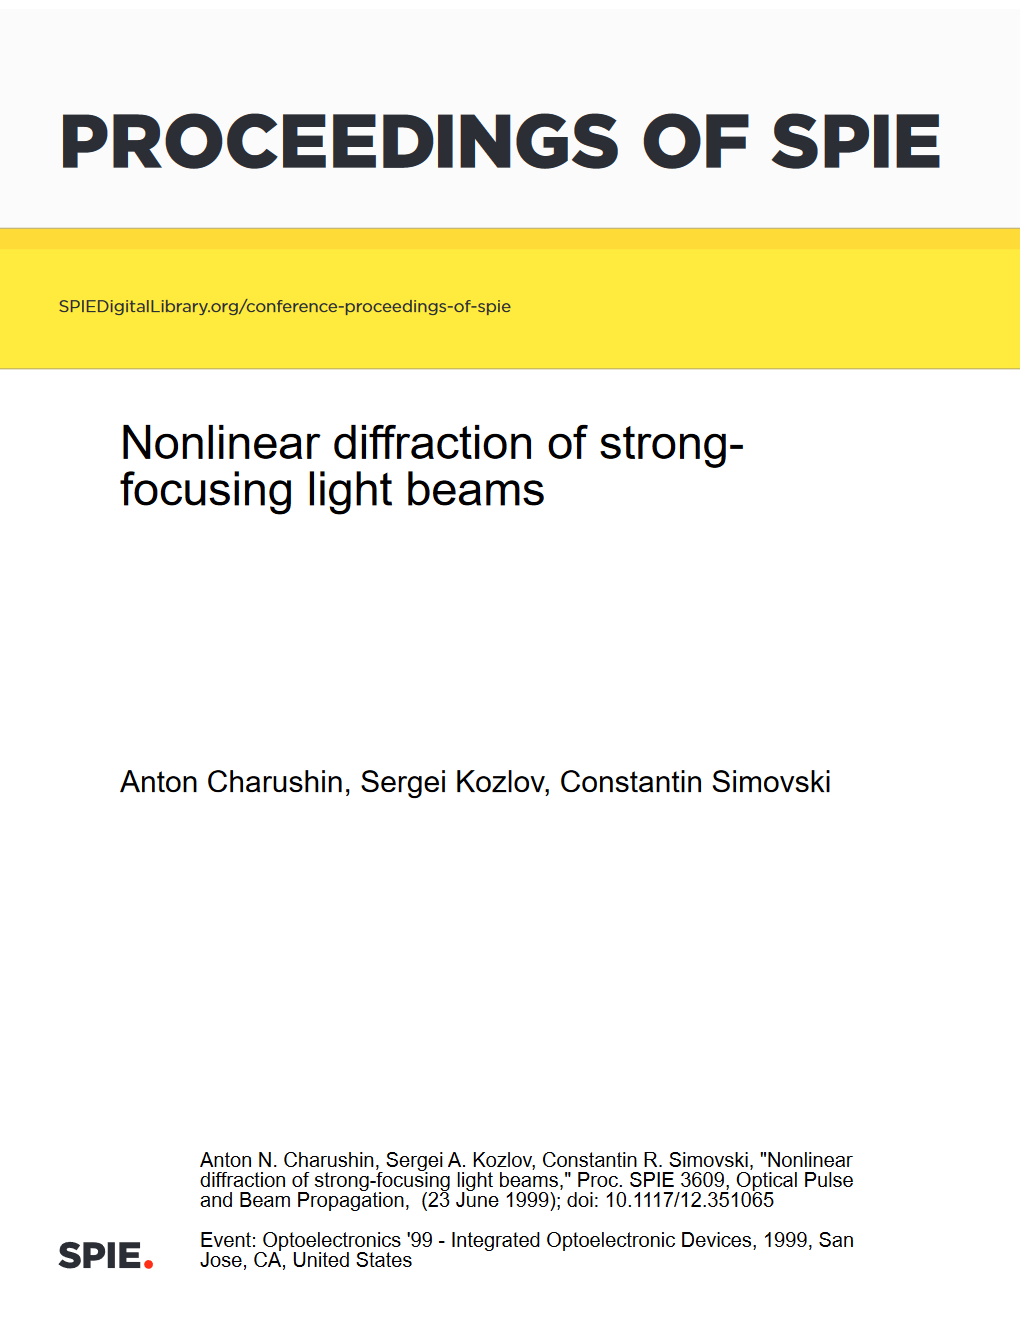 Nonlinear diffraction of strong-focusing light beams